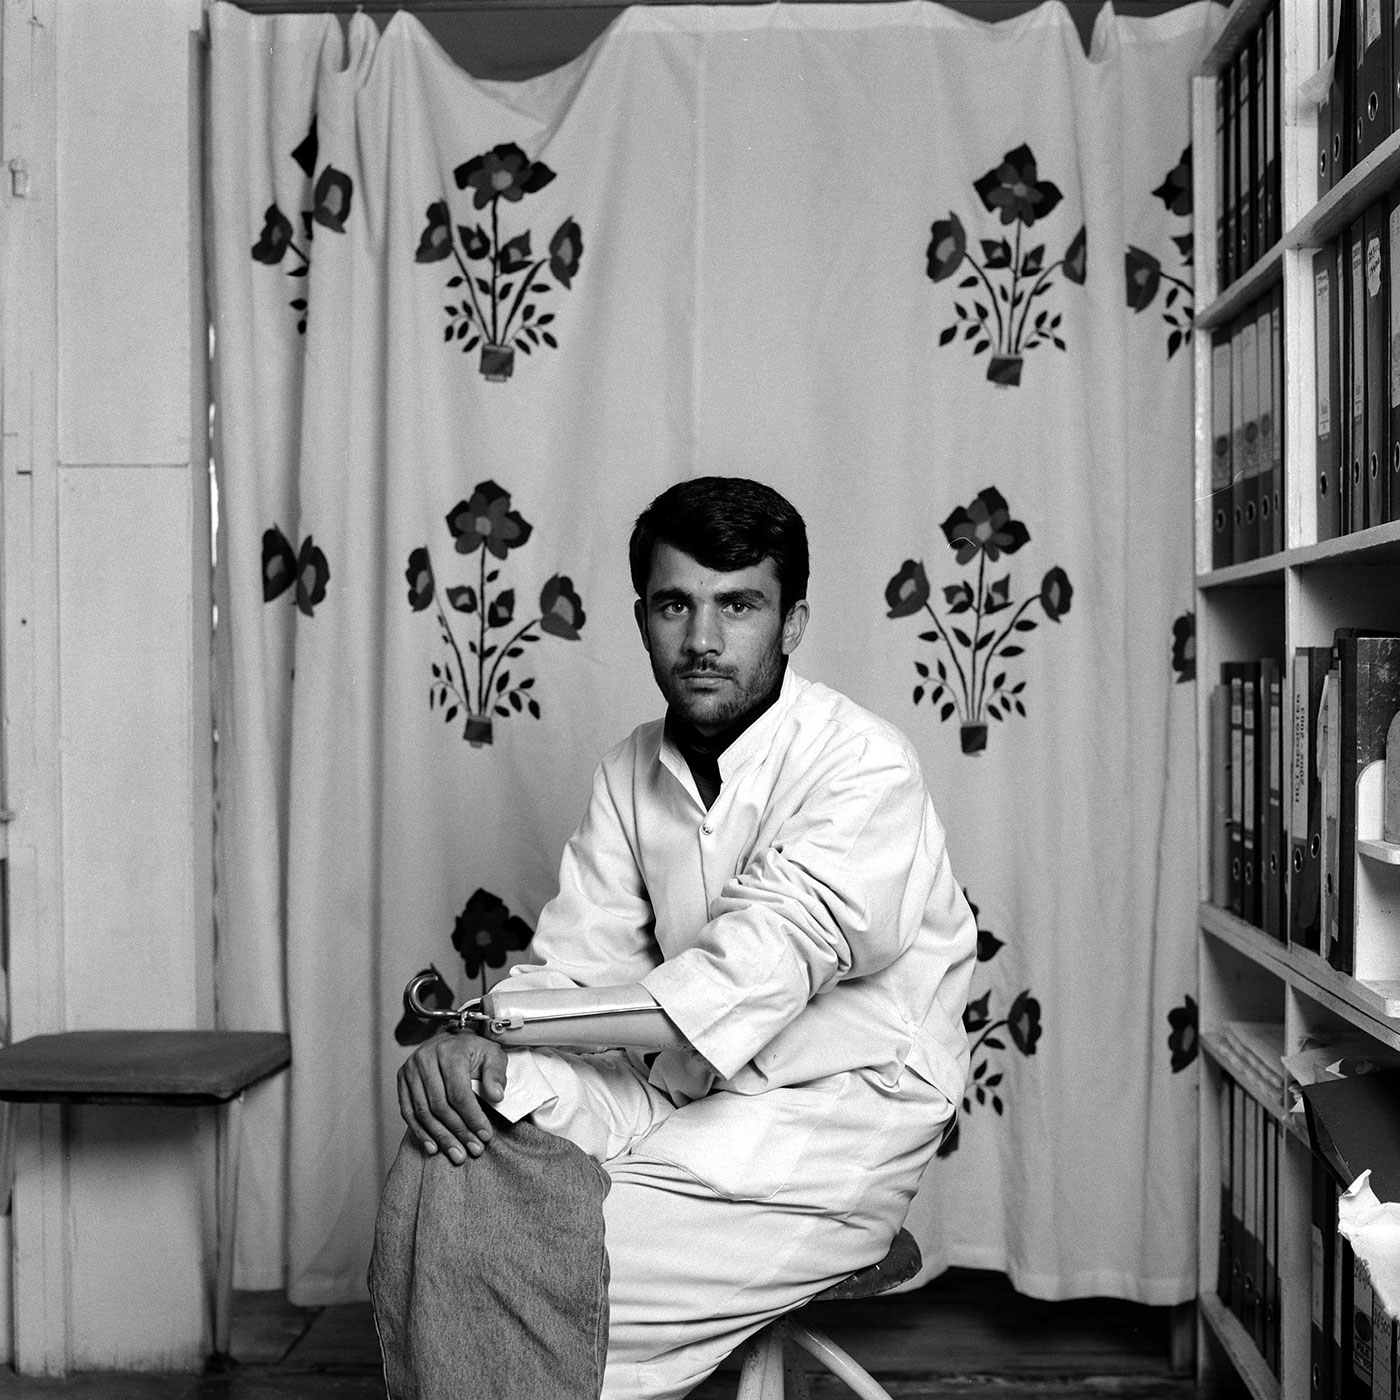 Black and white photograph of a seated man wearing light clothing, a sleeve rolled up to reveal a prosthetic arm with a hook on the end. He is in a room with a bookcase and a patterned curtain.